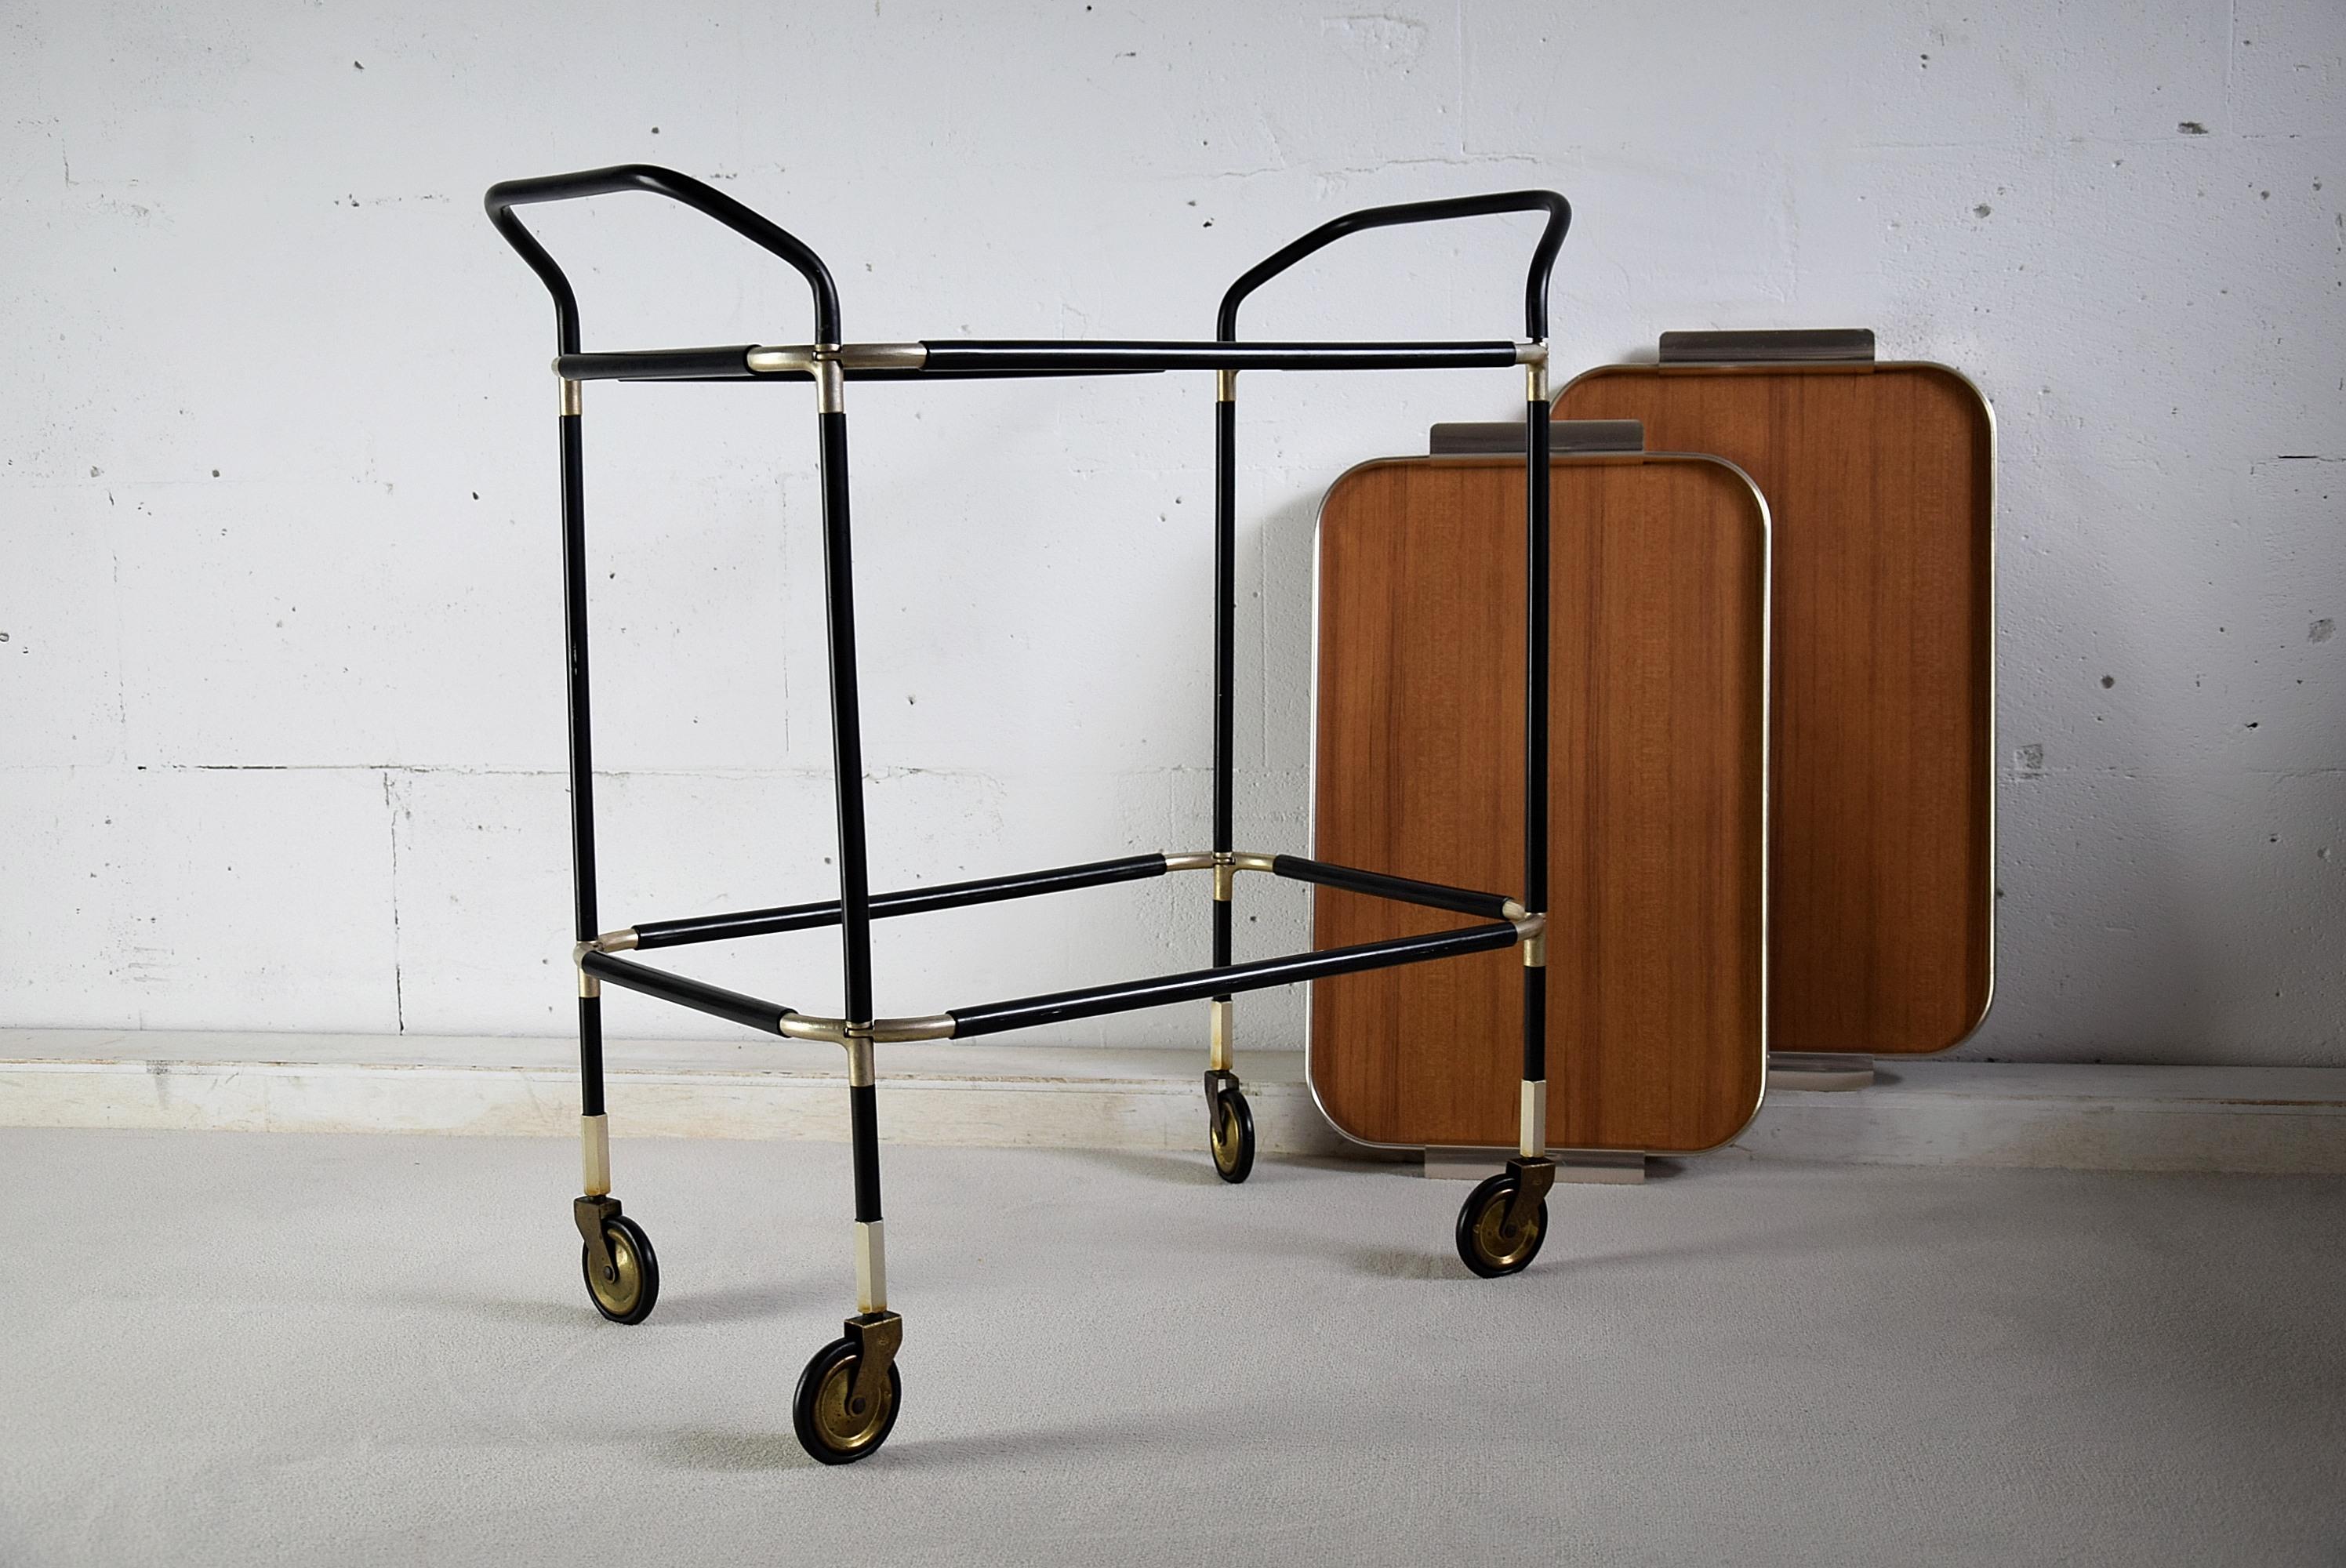 Stylish and elegant Italian 1960s bar trolley with two detachable serving trays. The trolley is in great condition as can be seen in the images.
The trolley will be shipped overseas insured in a custom made wooden crate. Cost of insured transport